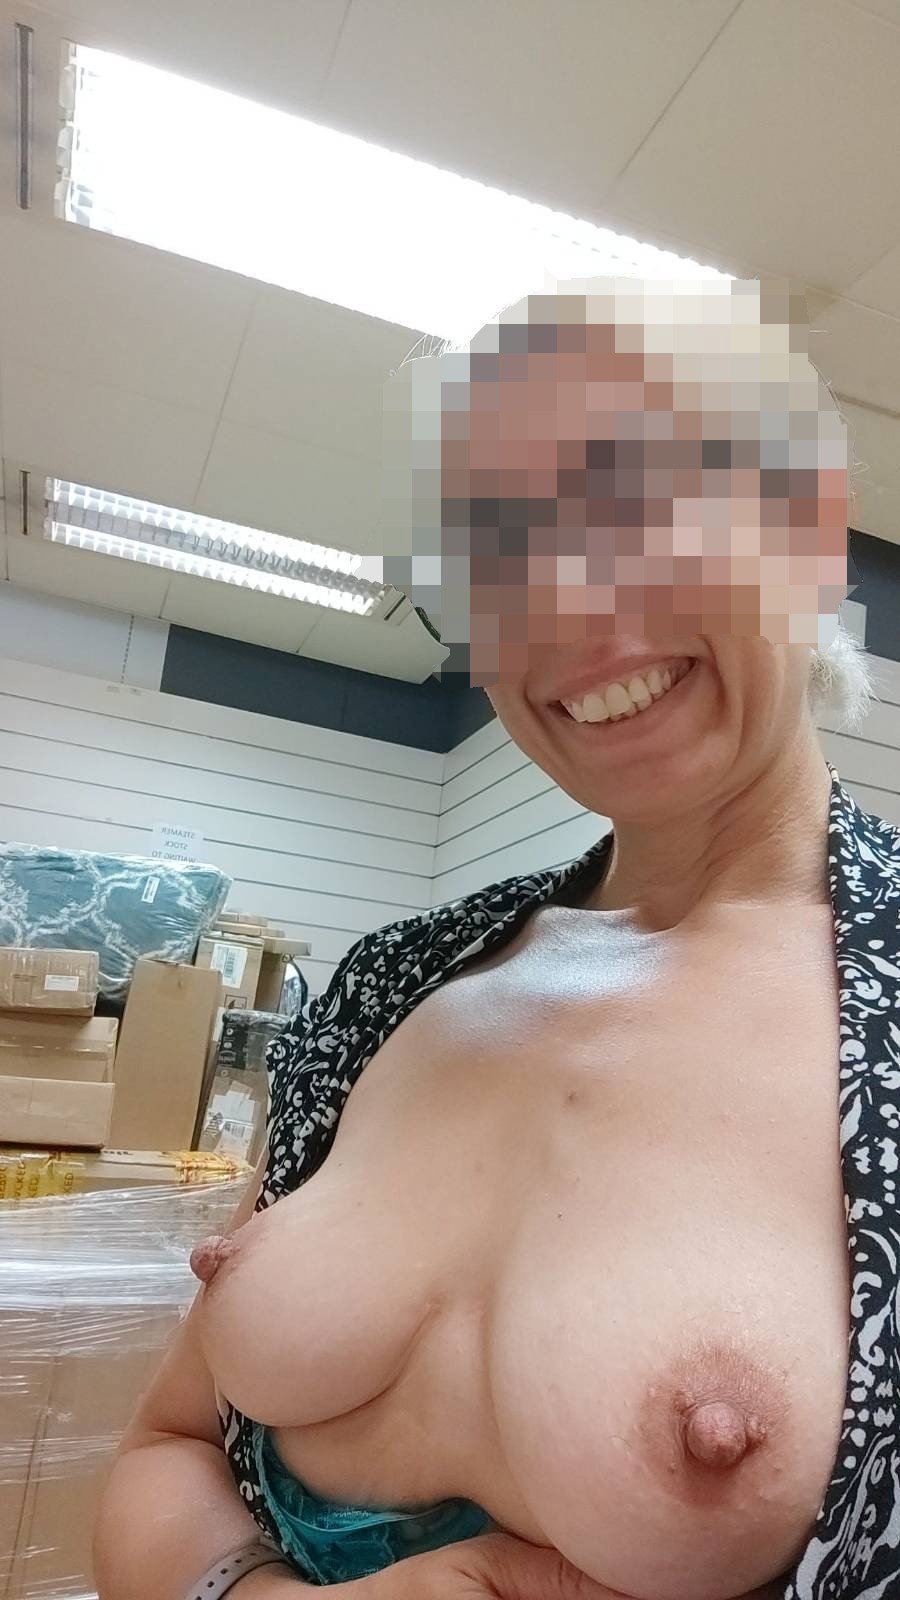 Photo by Joker_and_Harley with the username @Joker-and-Harley, who is a verified user,  December 12, 2022 at 2:39 PM. The post is about the topic Nudes at work and the text says 'Share,Like,Flame and comment... Cock/Cumtribute very welcome ... plenty of choice on our gallery....and tag to let us know of course!!'